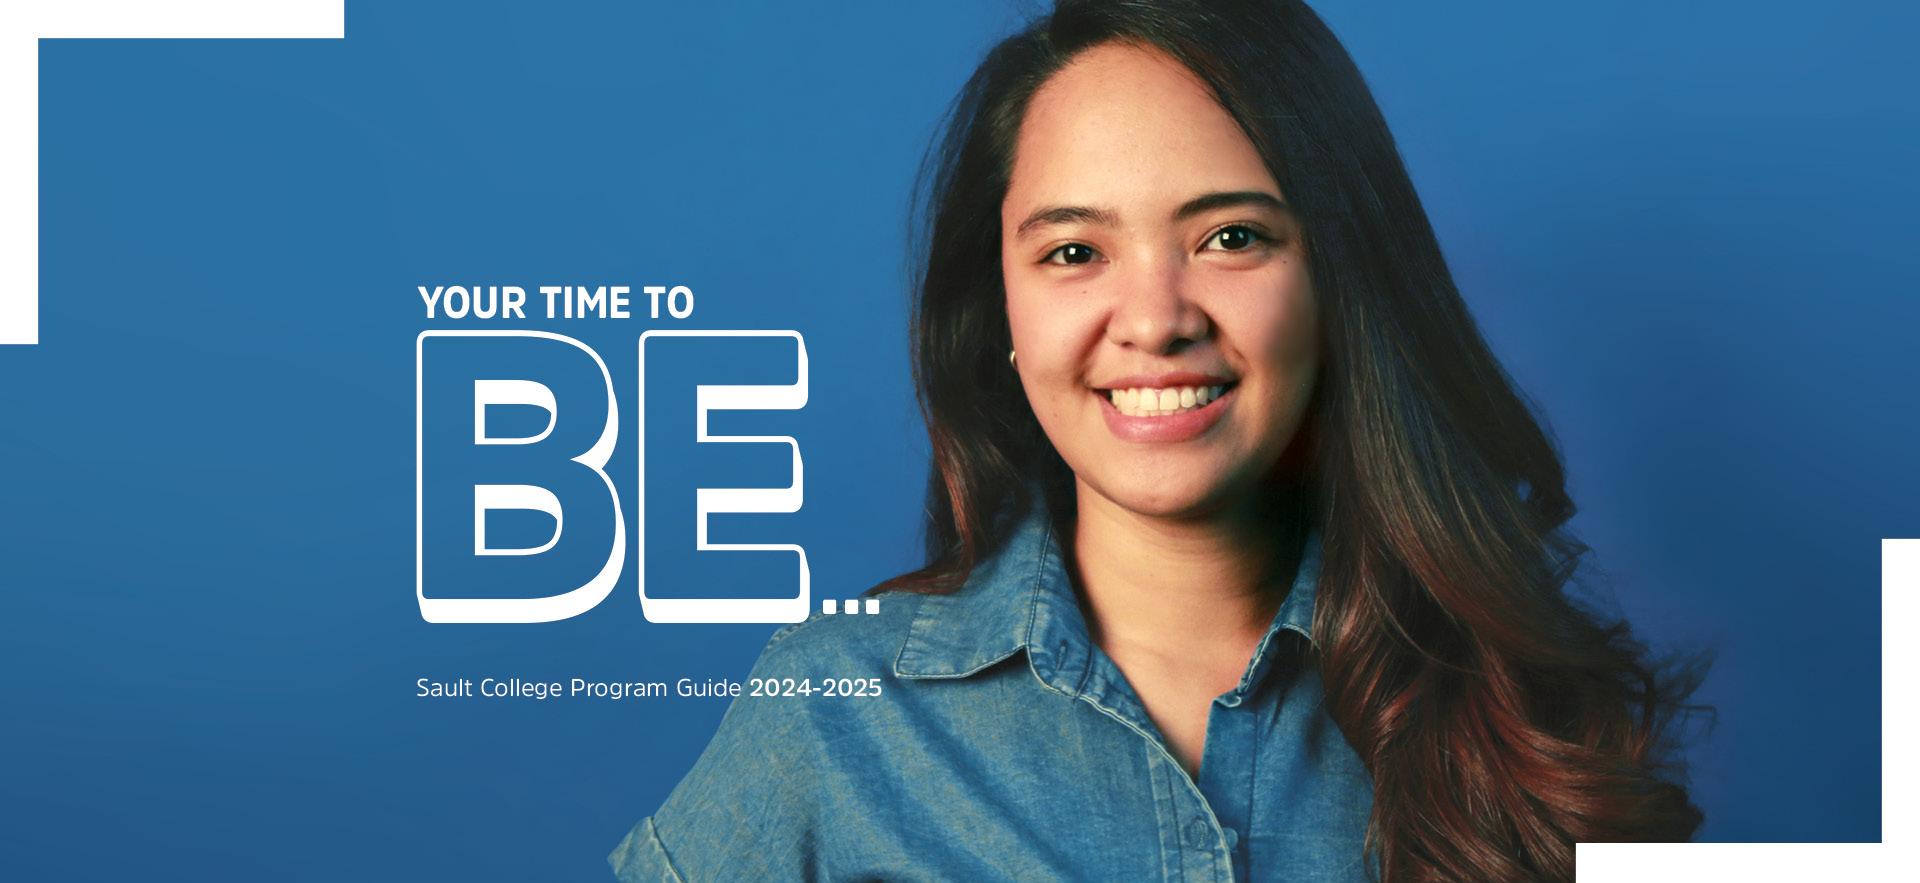 Female student in blue shirt smiling with blue background and text overlay "your time to BE..." for ˾ Program Guide for 2024-25